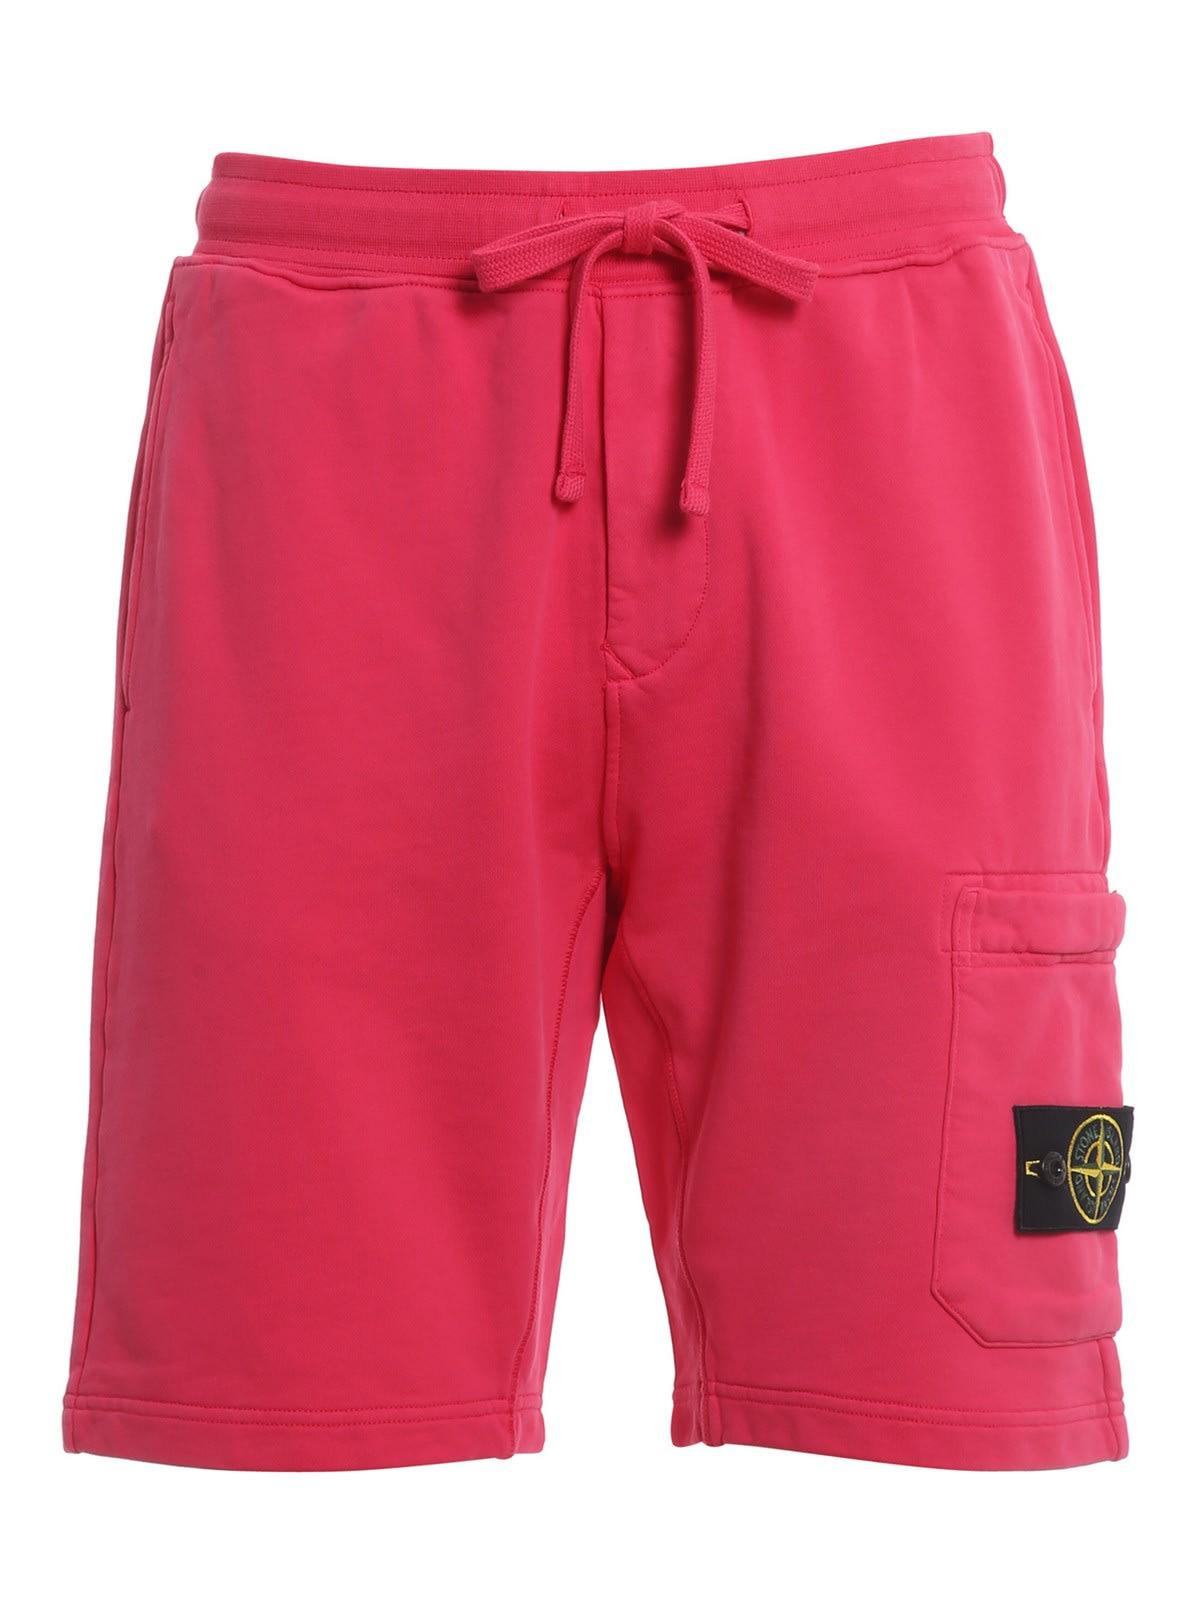 Stone Island Cotton Sweat Shorts in Red for Men - Save 35% | Lyst